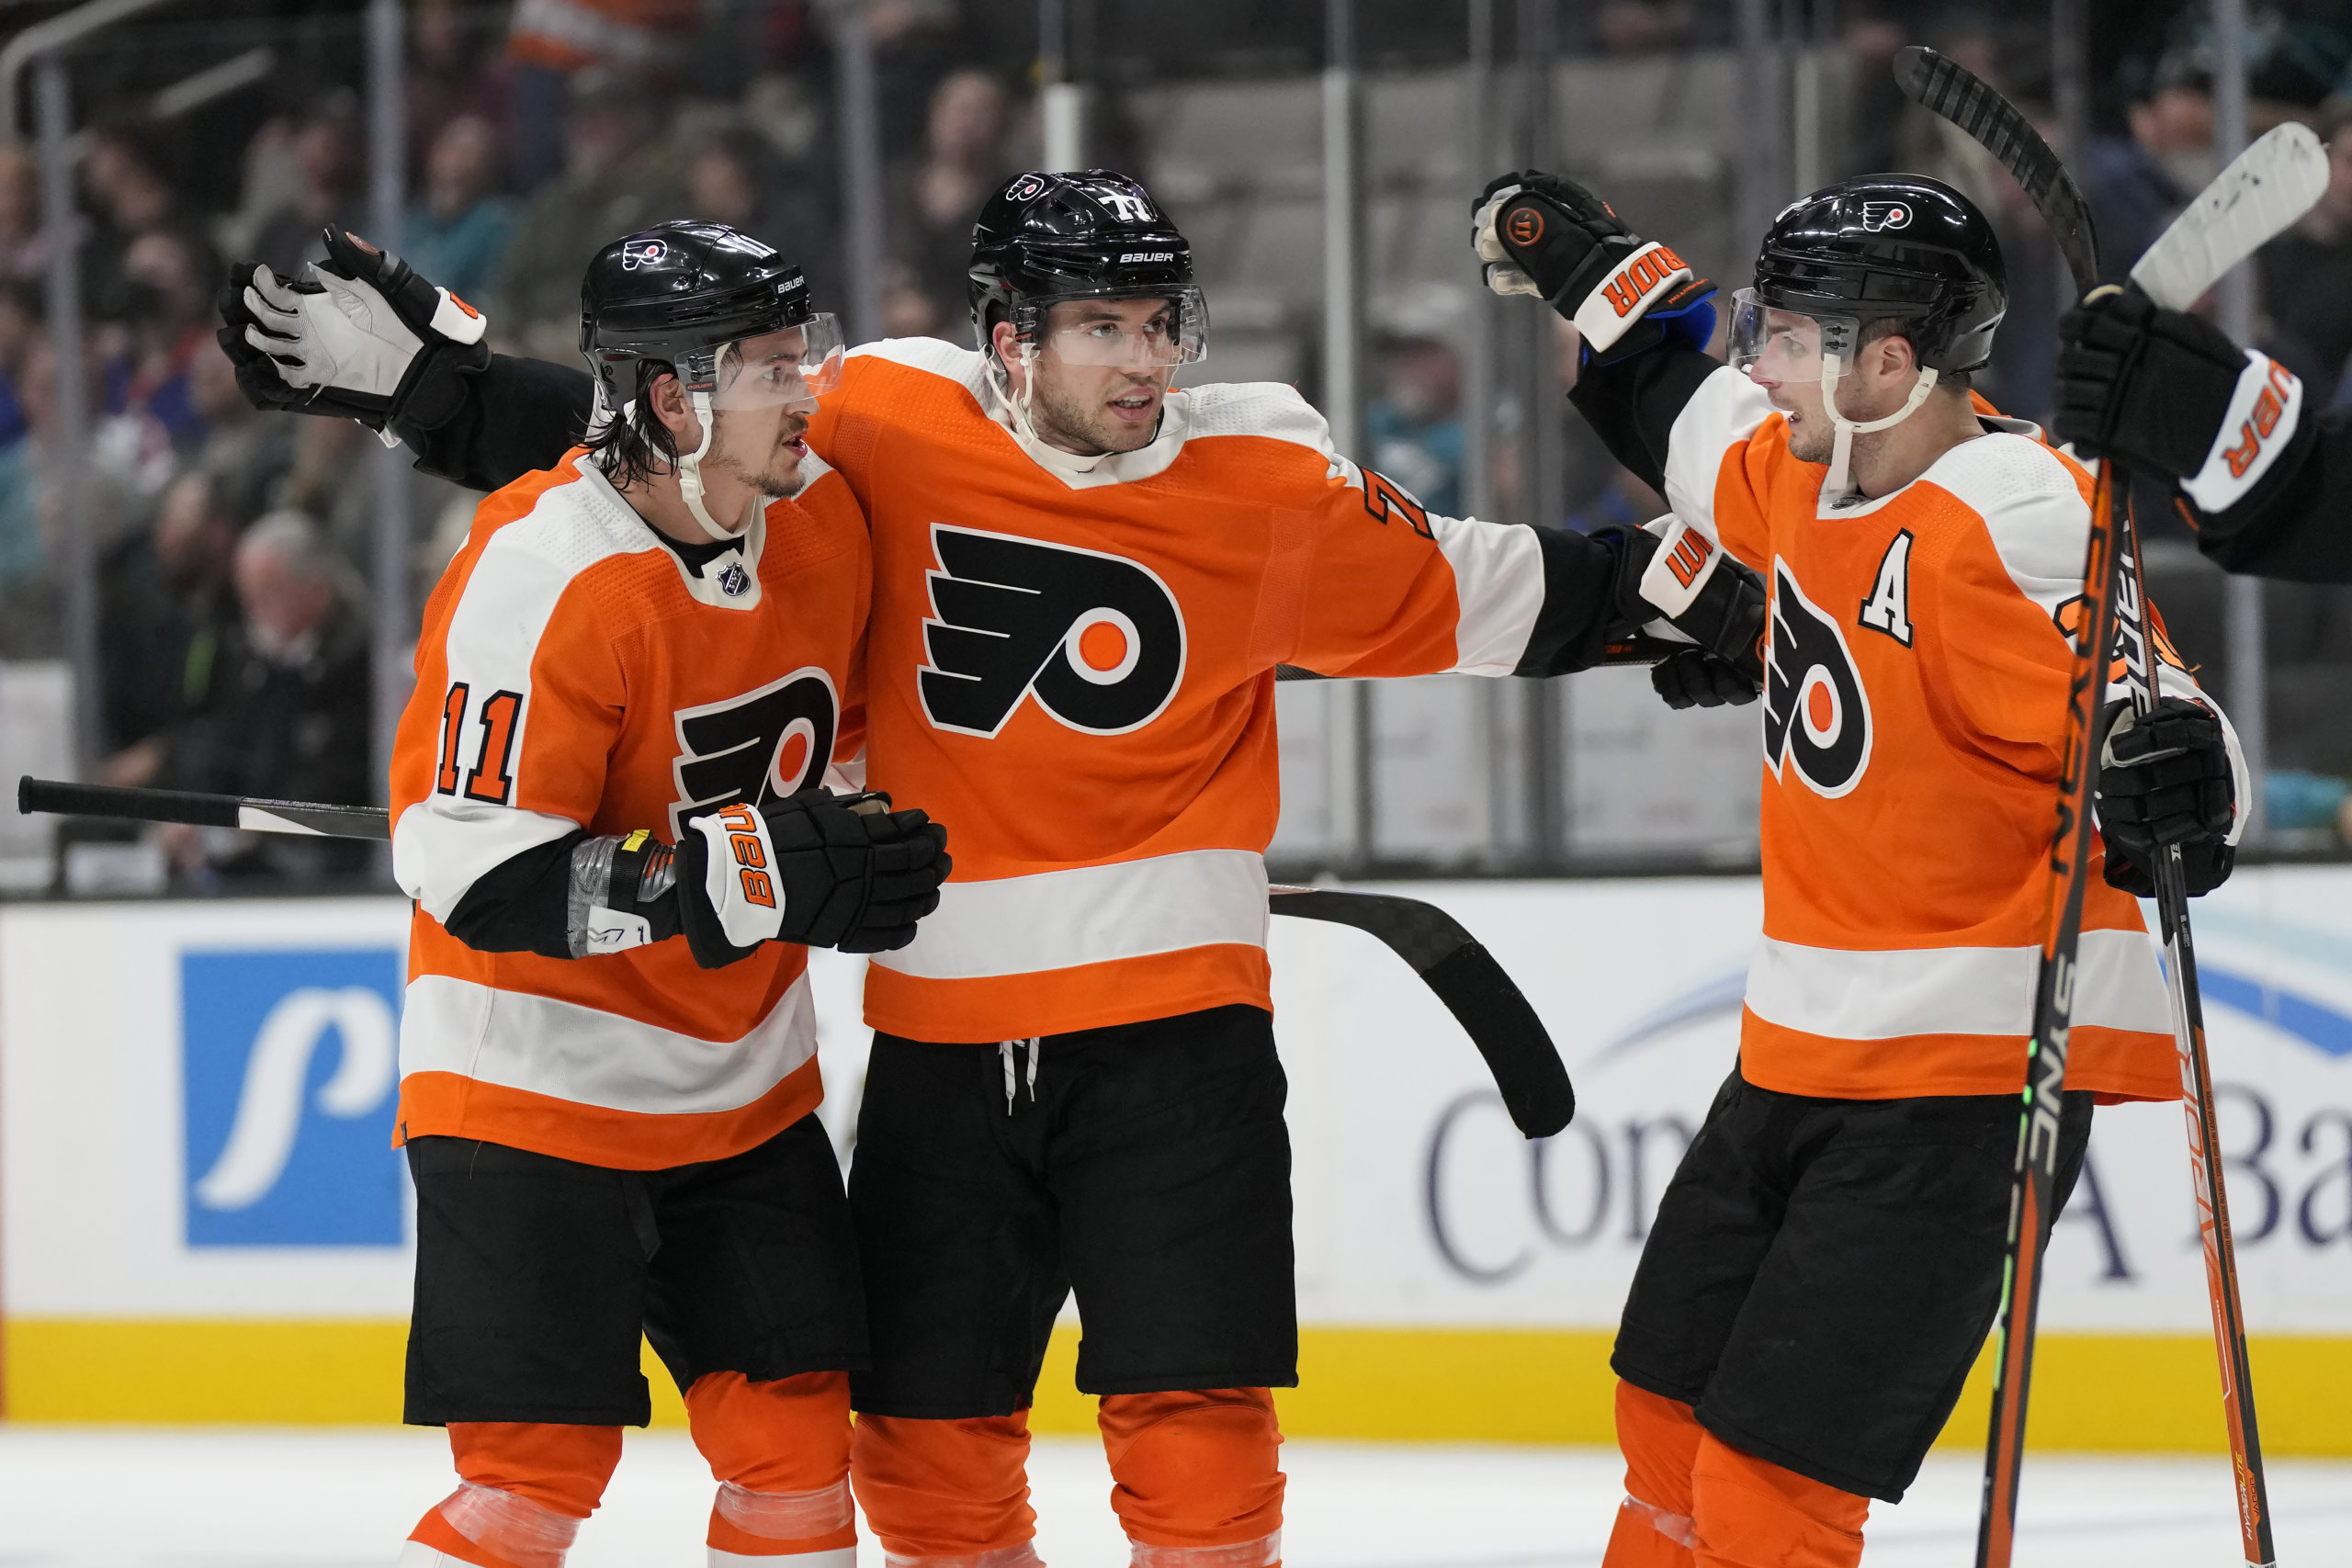 Briere leads post-season charge for Flyers - The Hockey News